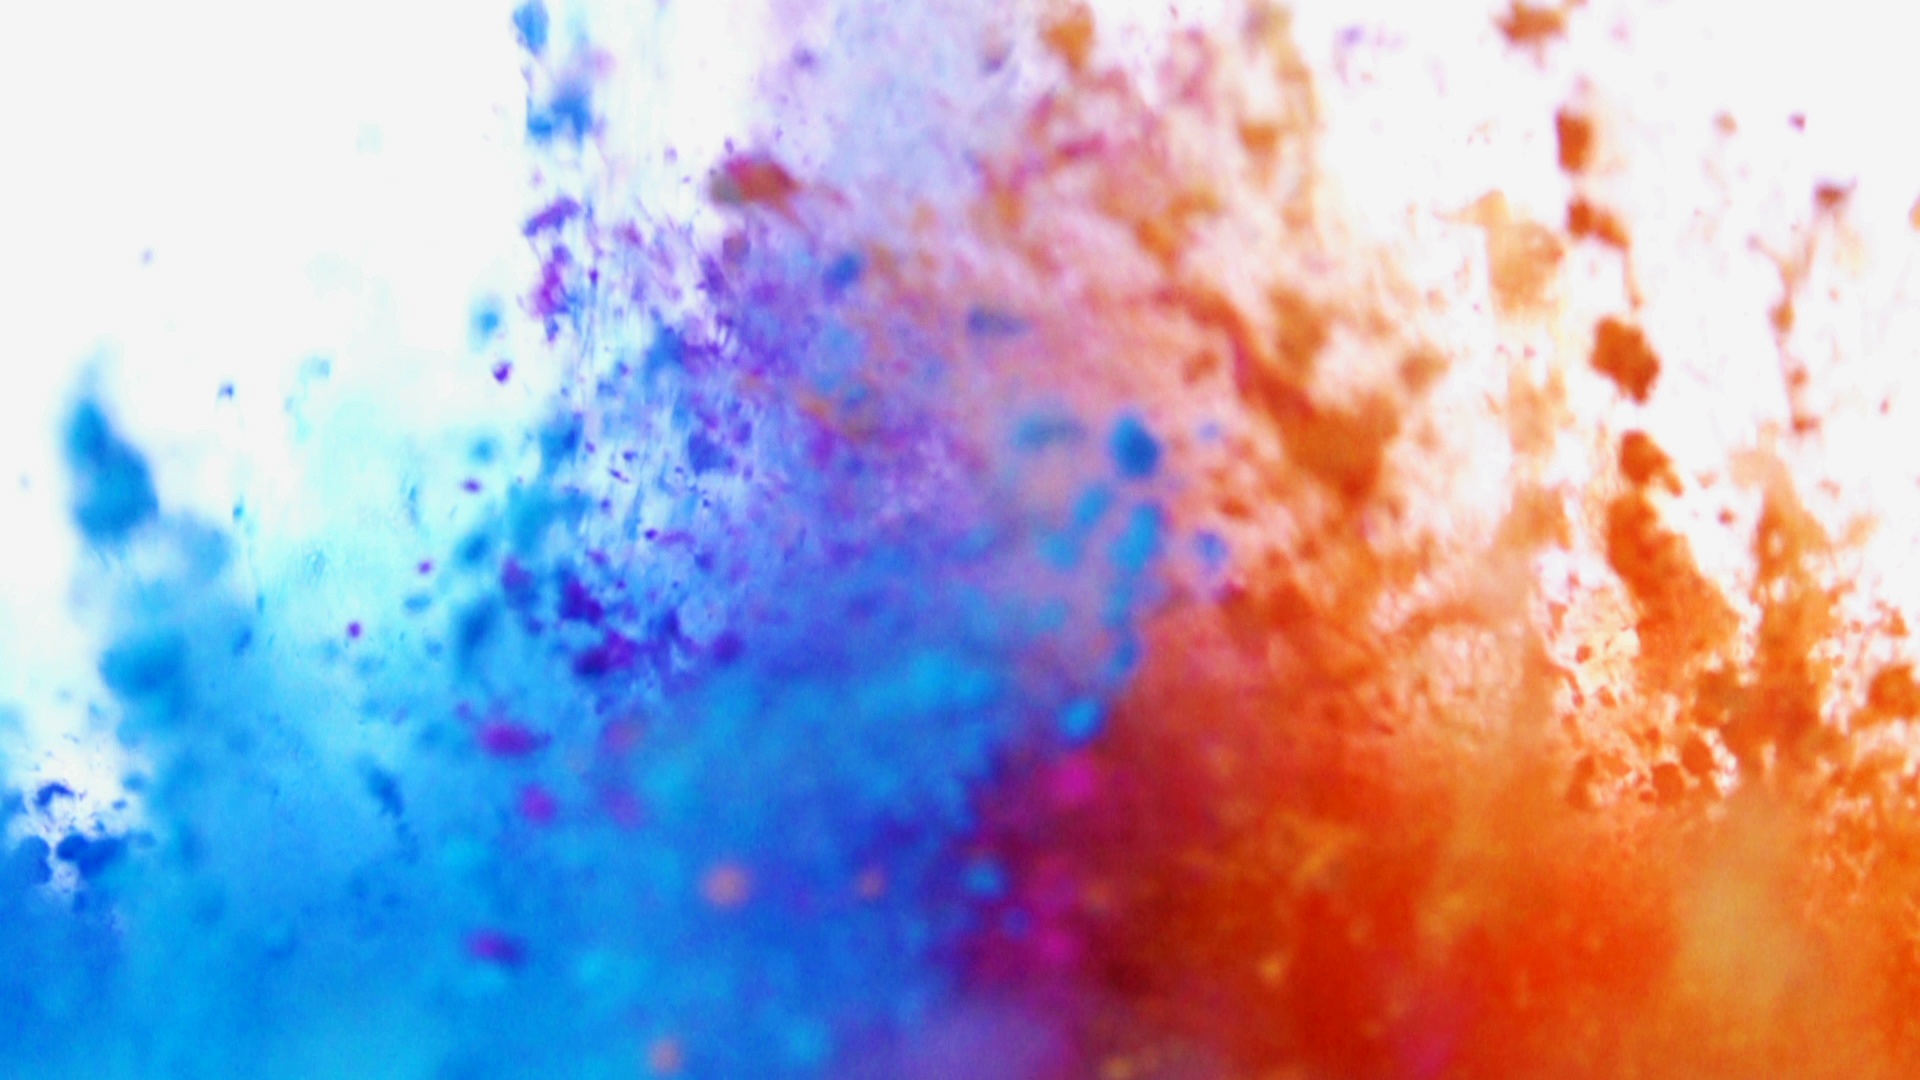 Color Powder Dust Explosions Background Texture In Watercolor